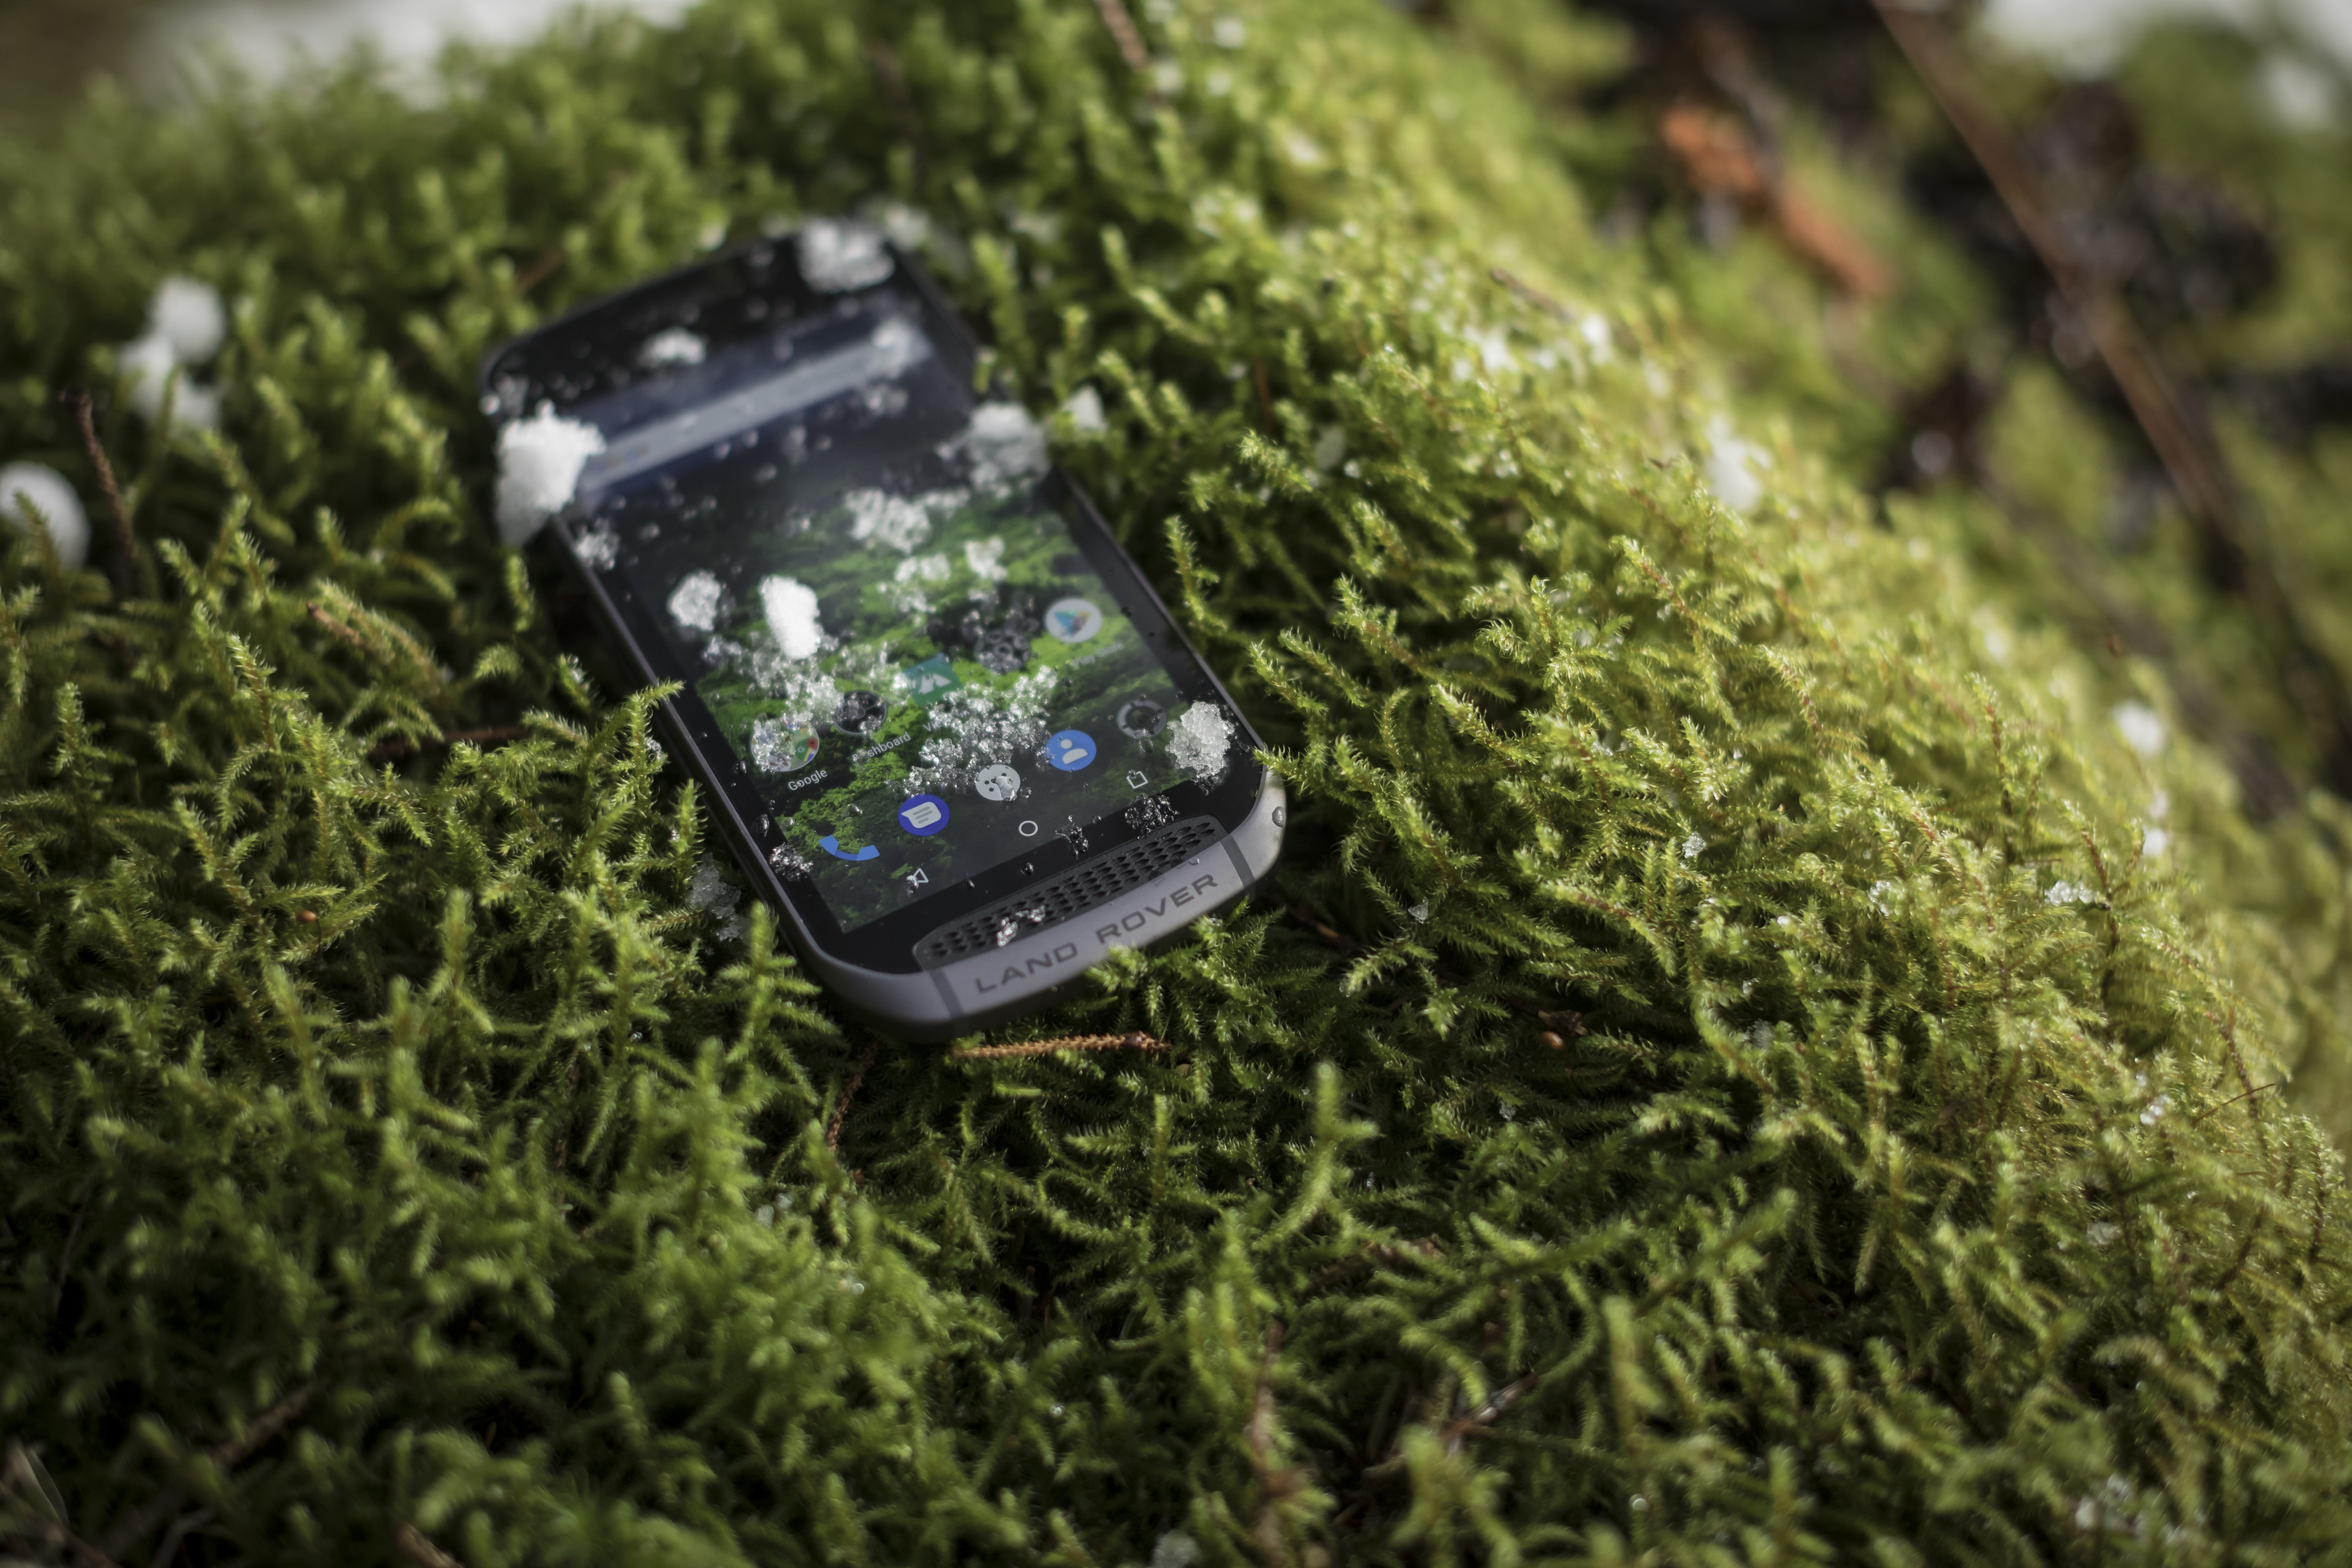 The Land Rover Explore smartphone works in below-freezing temperatures as well as in extreme humidity.